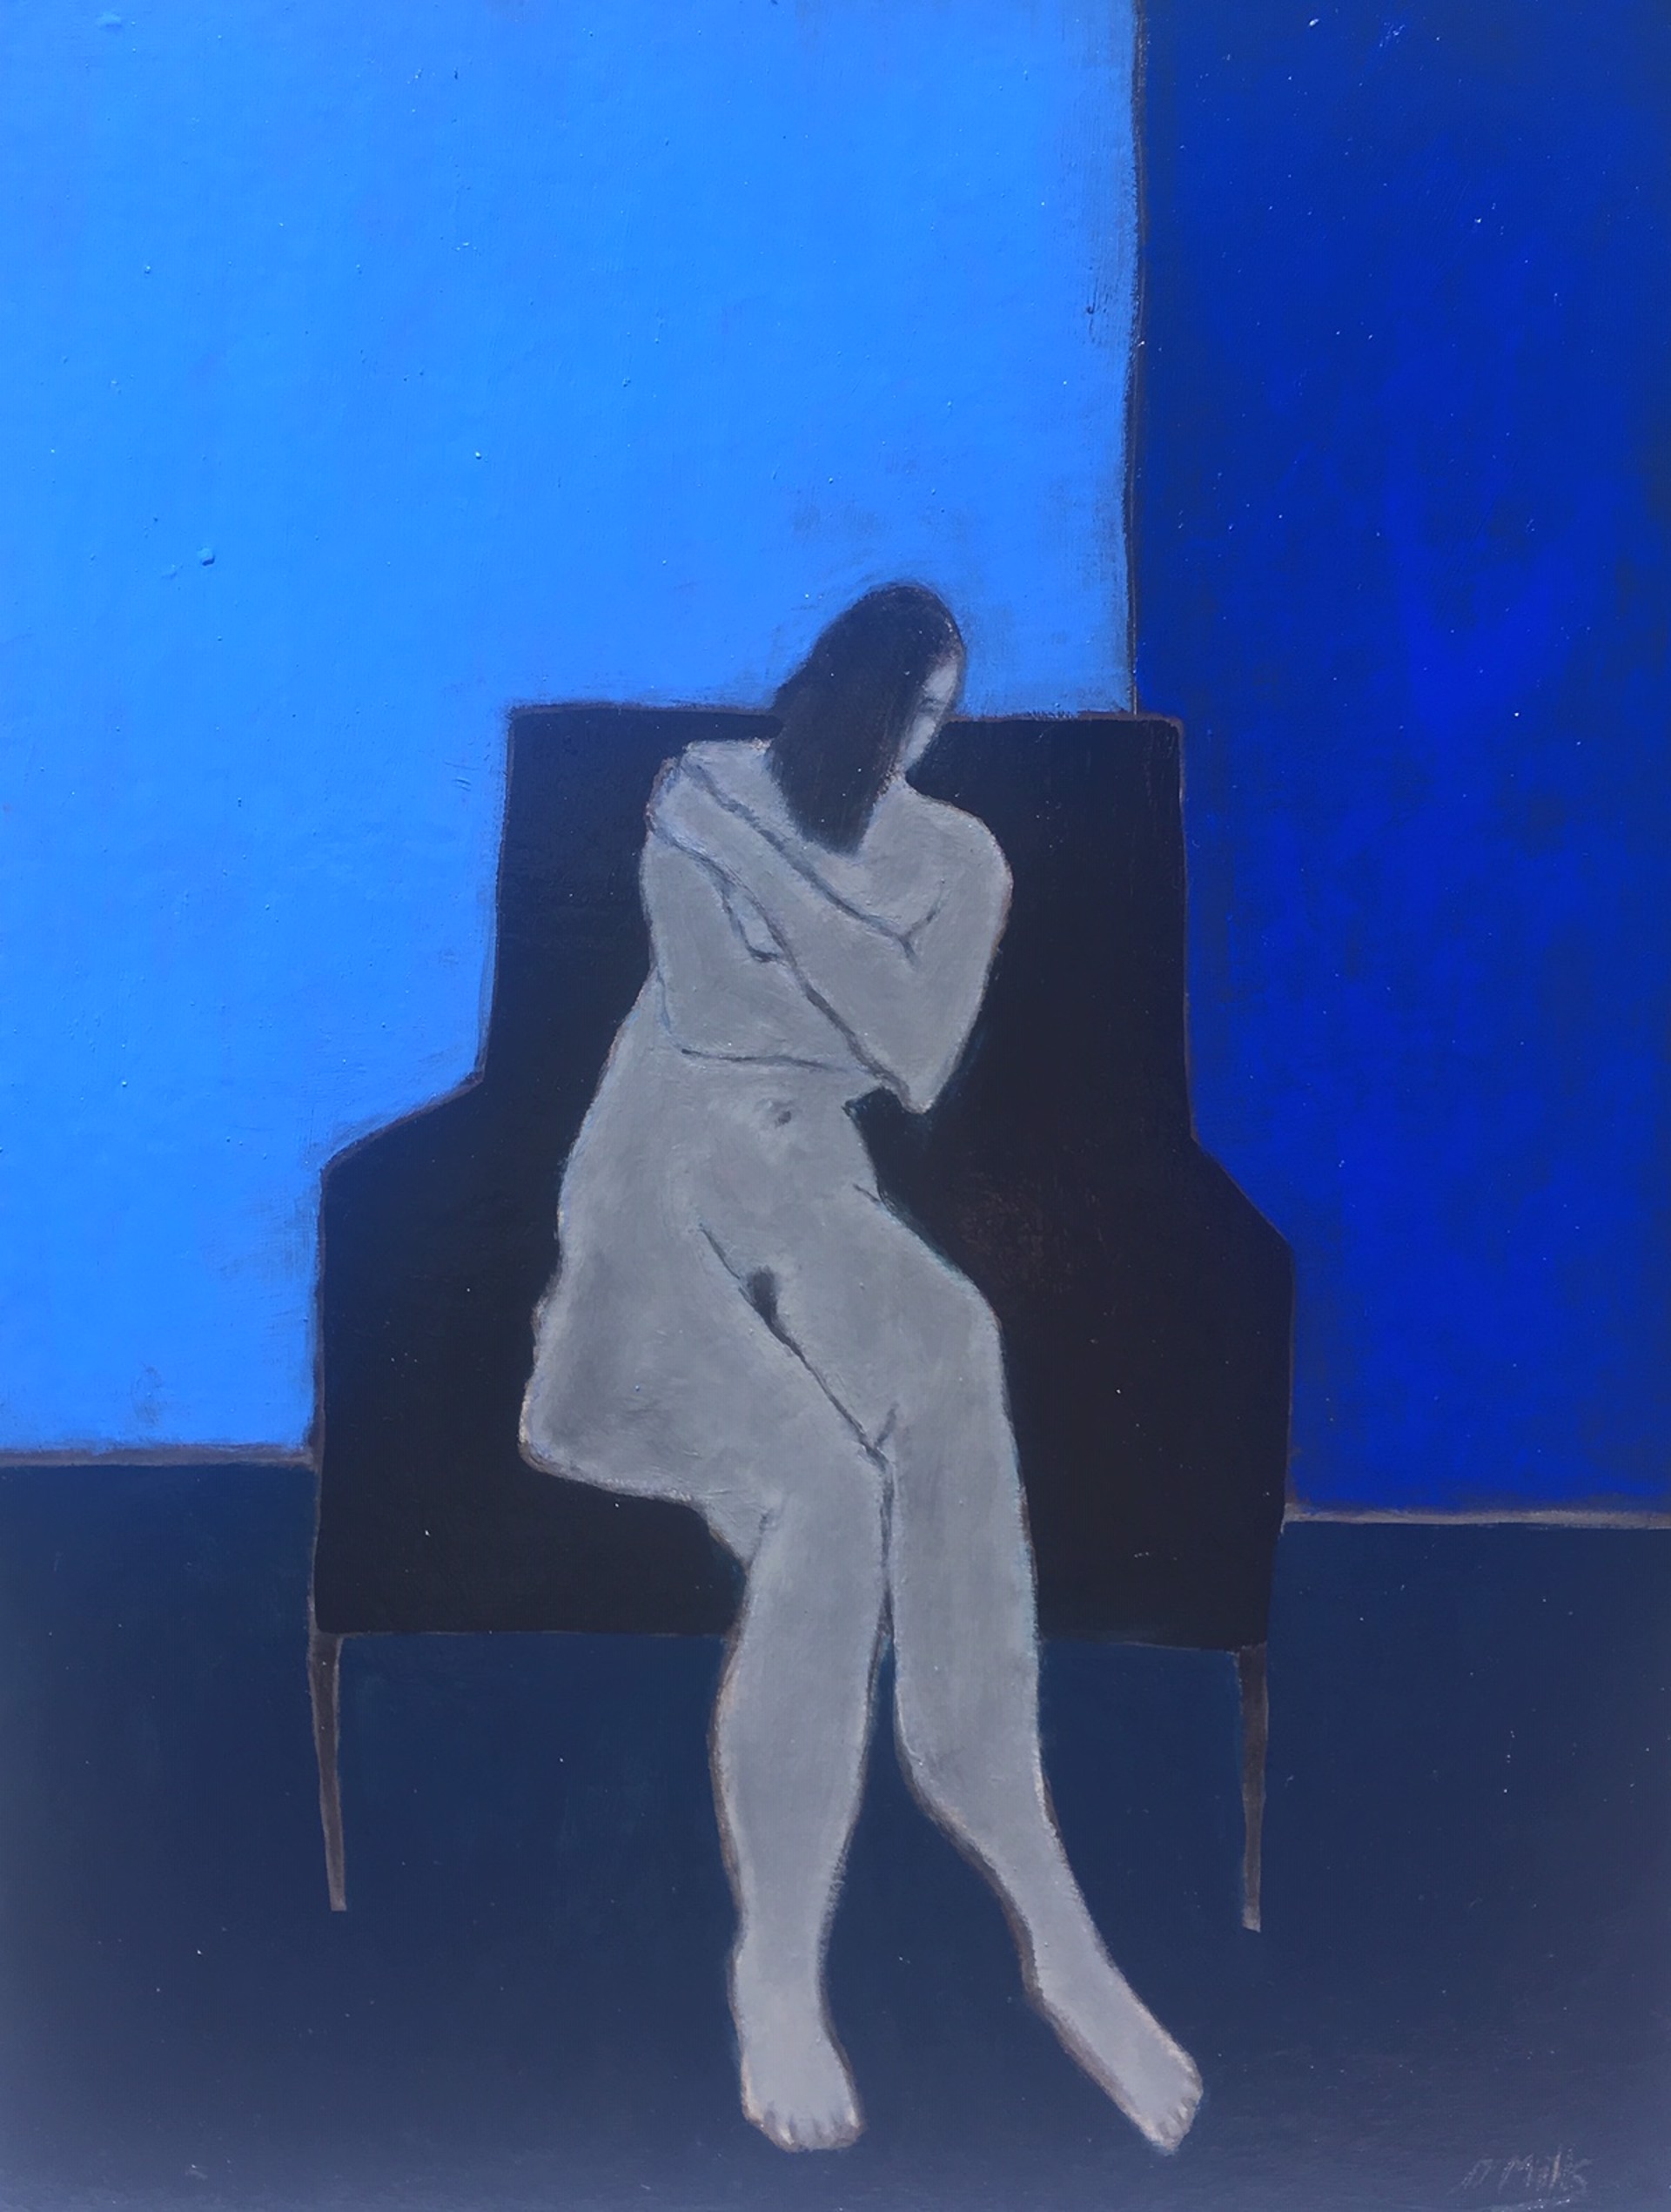 Nude in a Blue Room  by Gigi Mills